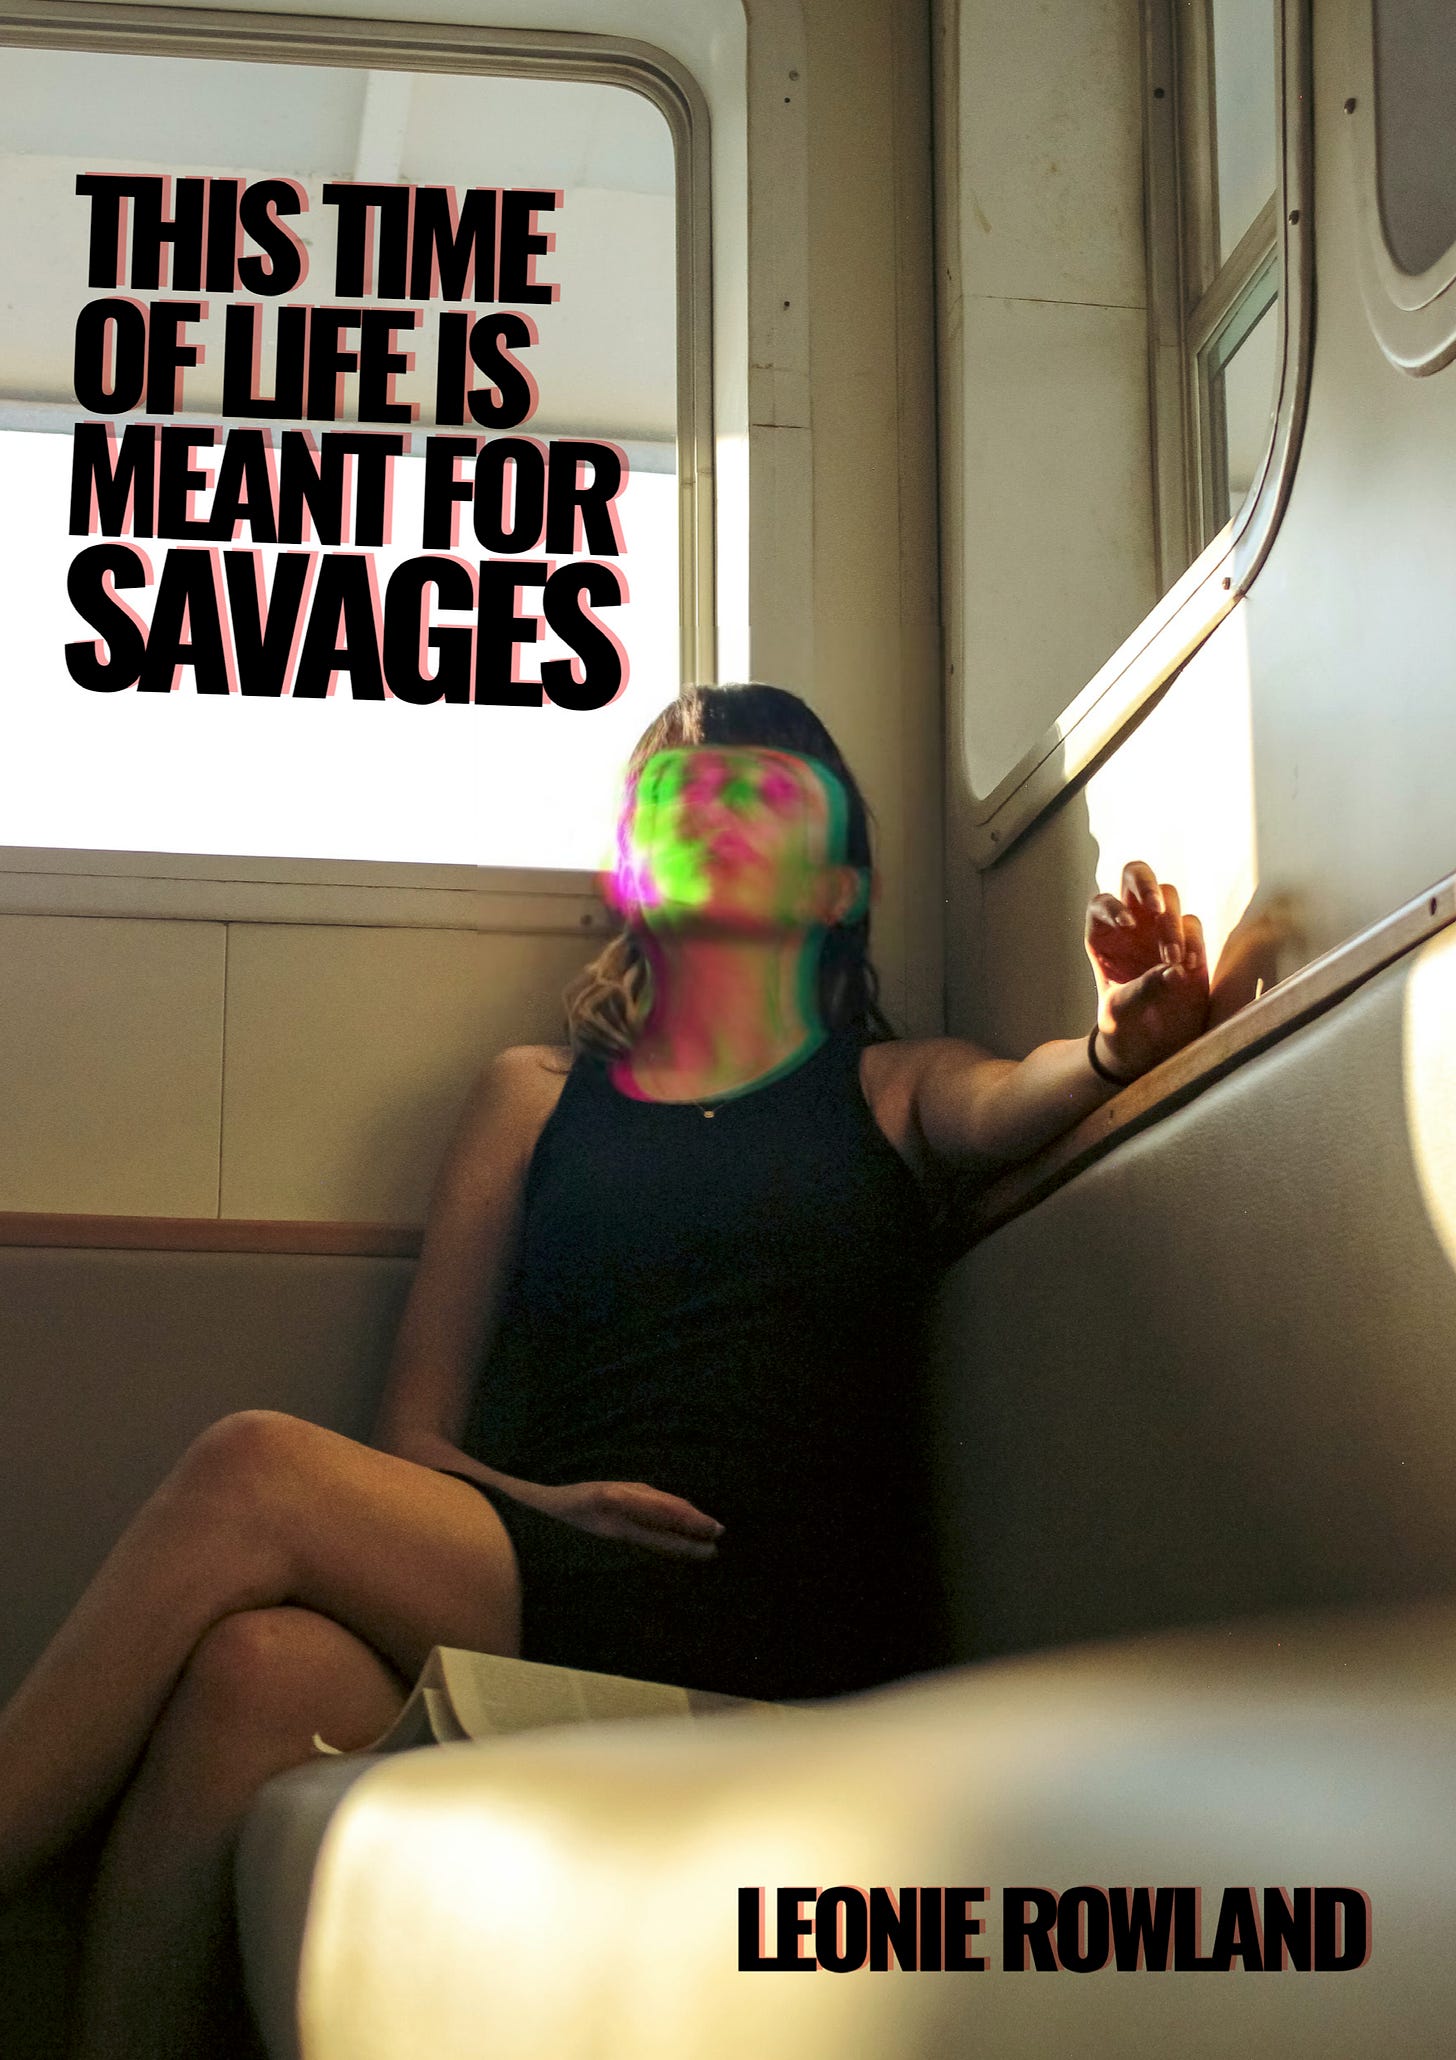 The cover of a new poetry collection. The title is "This Time of Life is Meant for Savages" and the author is Leonie Rowland. On the book cover, a woman sits in the carriage of an ambiguous form of public transport. The woman's face is glitchy, with pink and green coming through as if she is phasing between different realities.